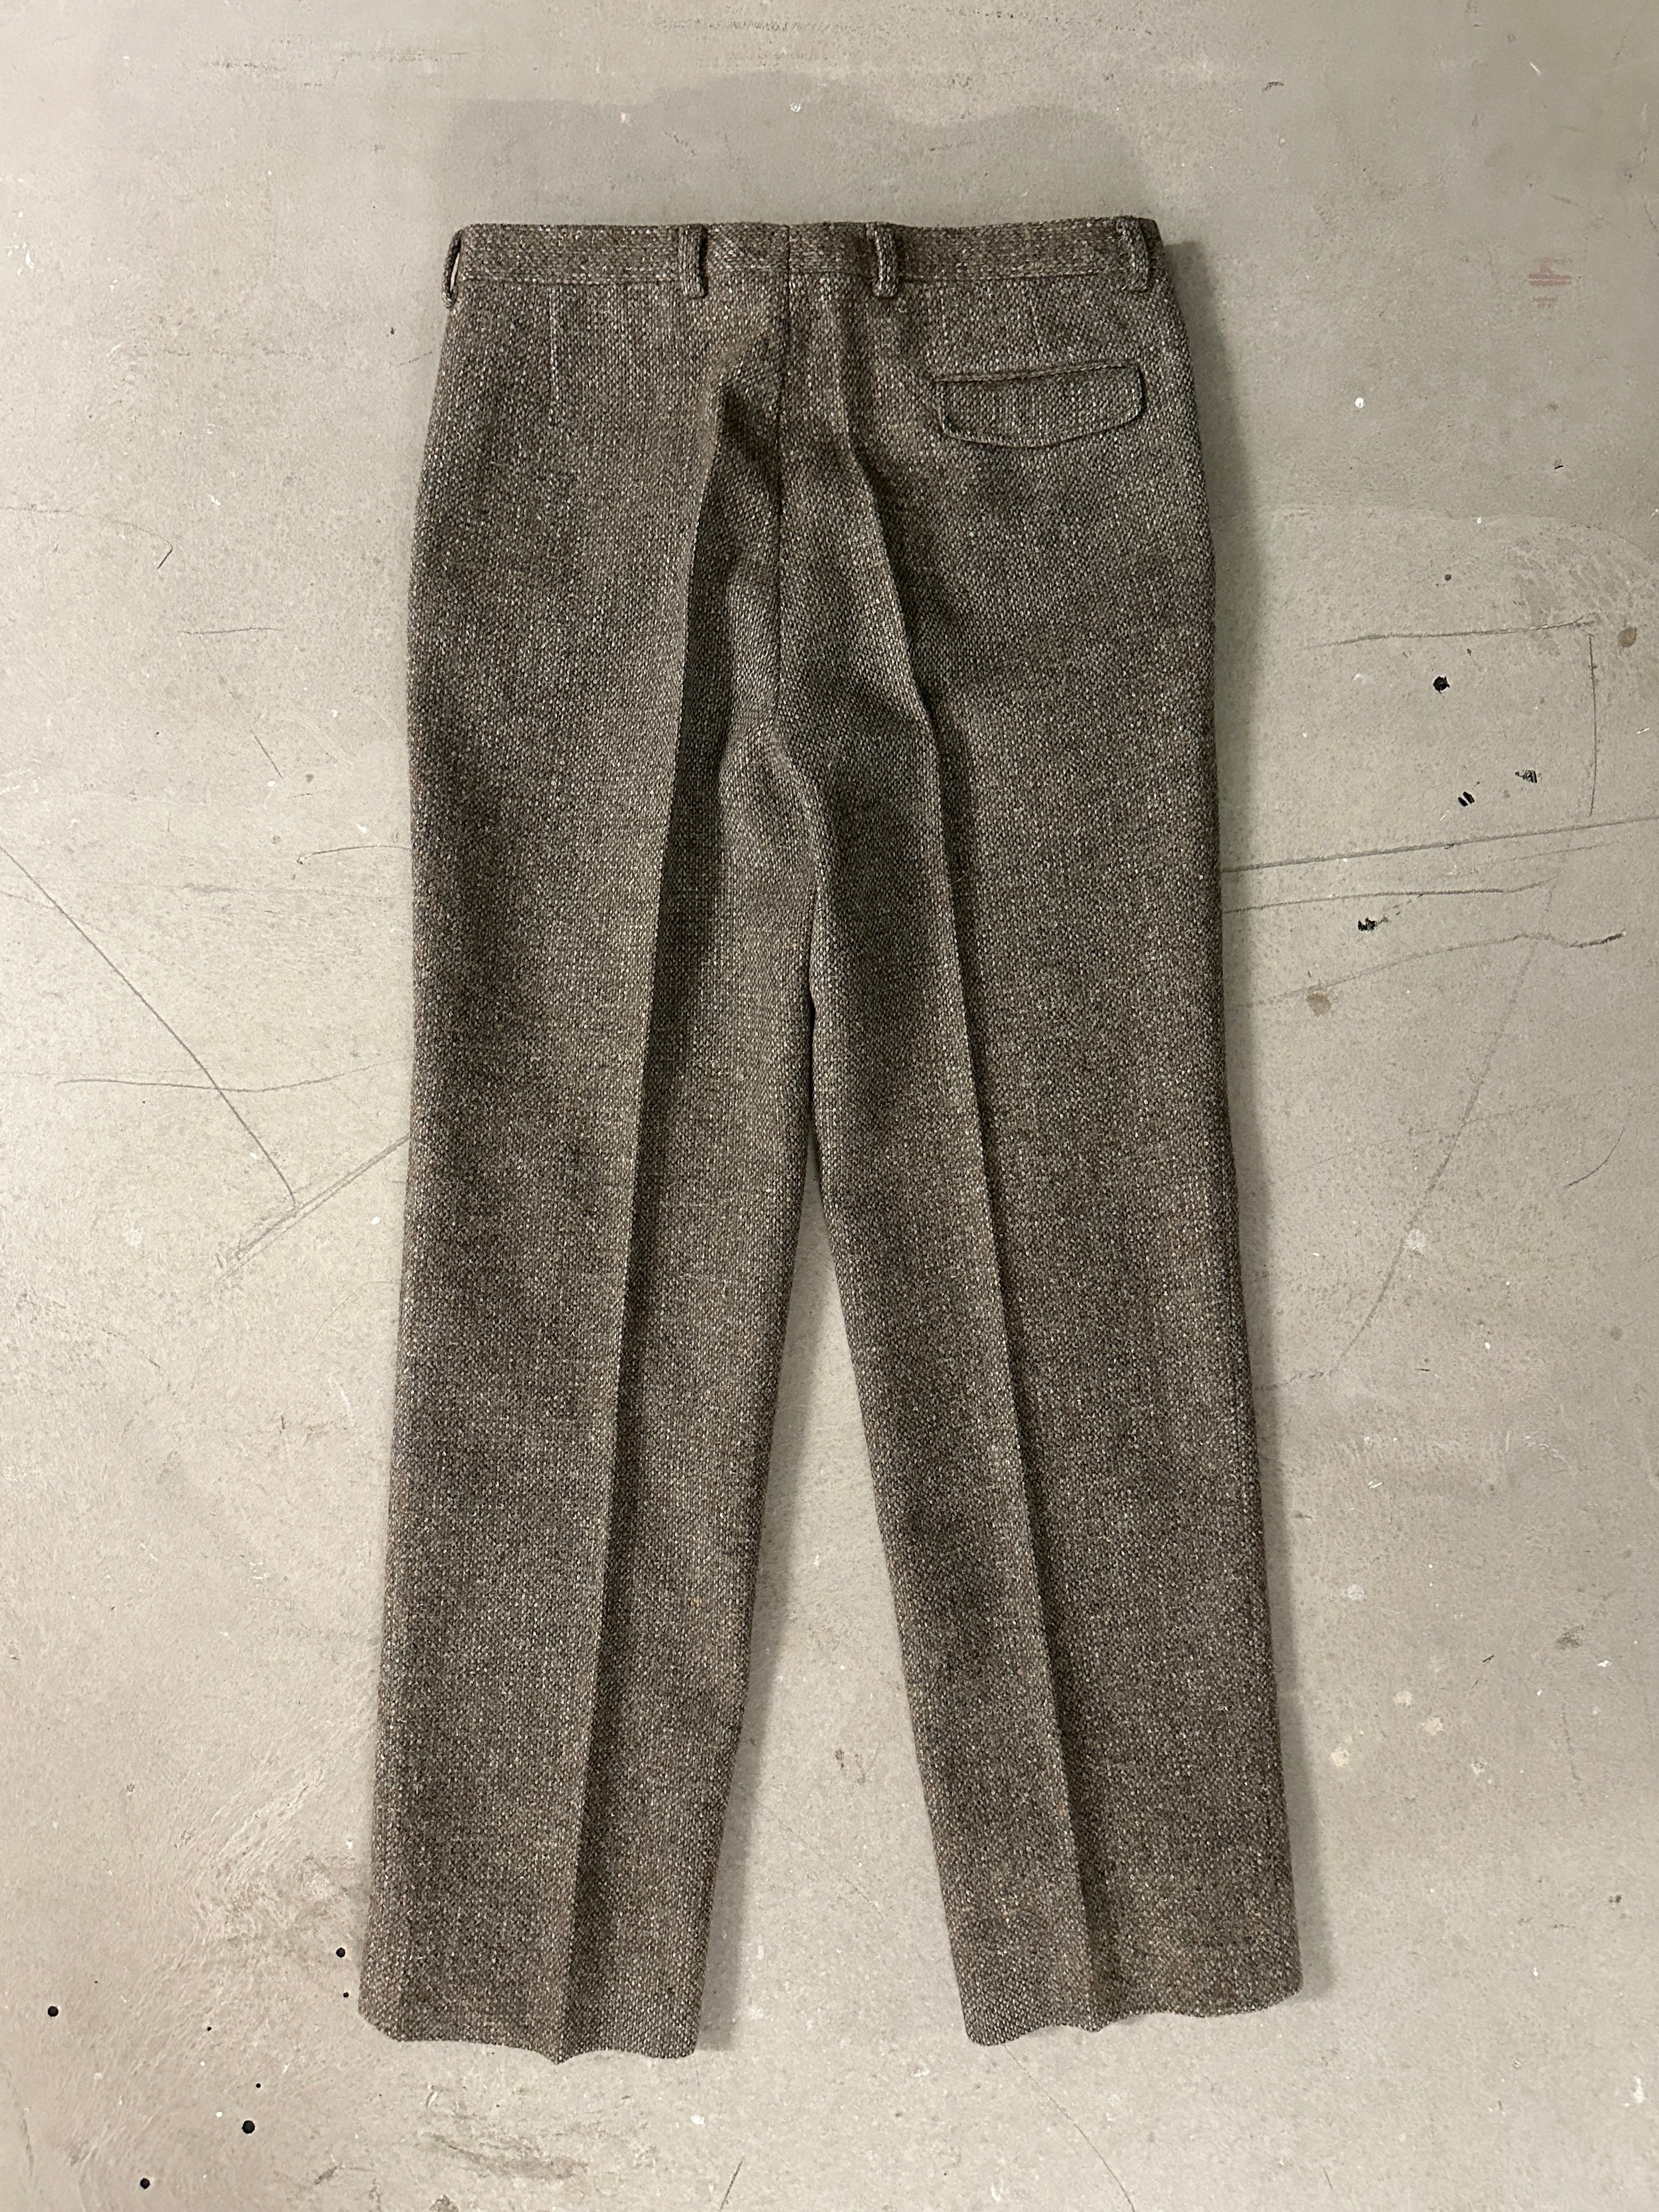 VALENTINO - 1980s FRONT PLEATS TWEED TROUSERS